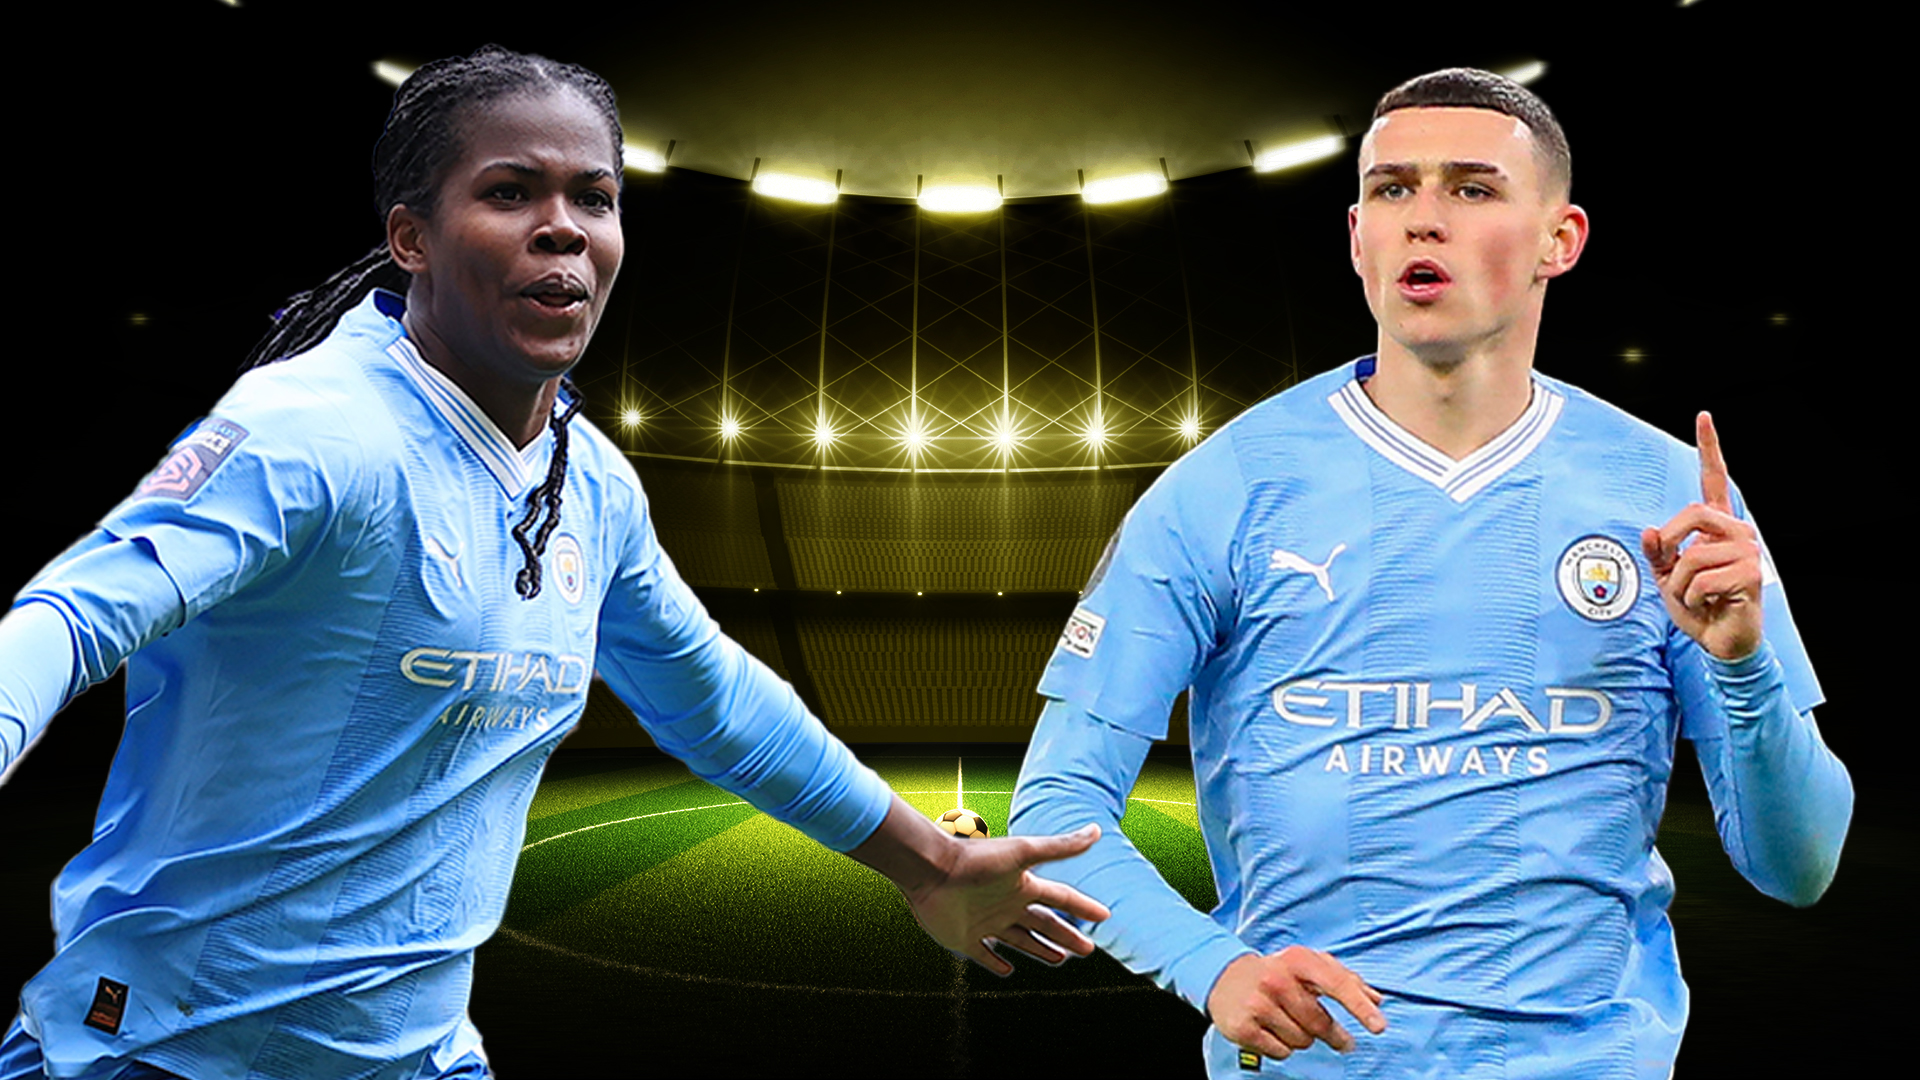 Man City claim double as Phil Foden and Bunny Shaw pip Arsenal and Chelsea stars to FWA Awards [Video]